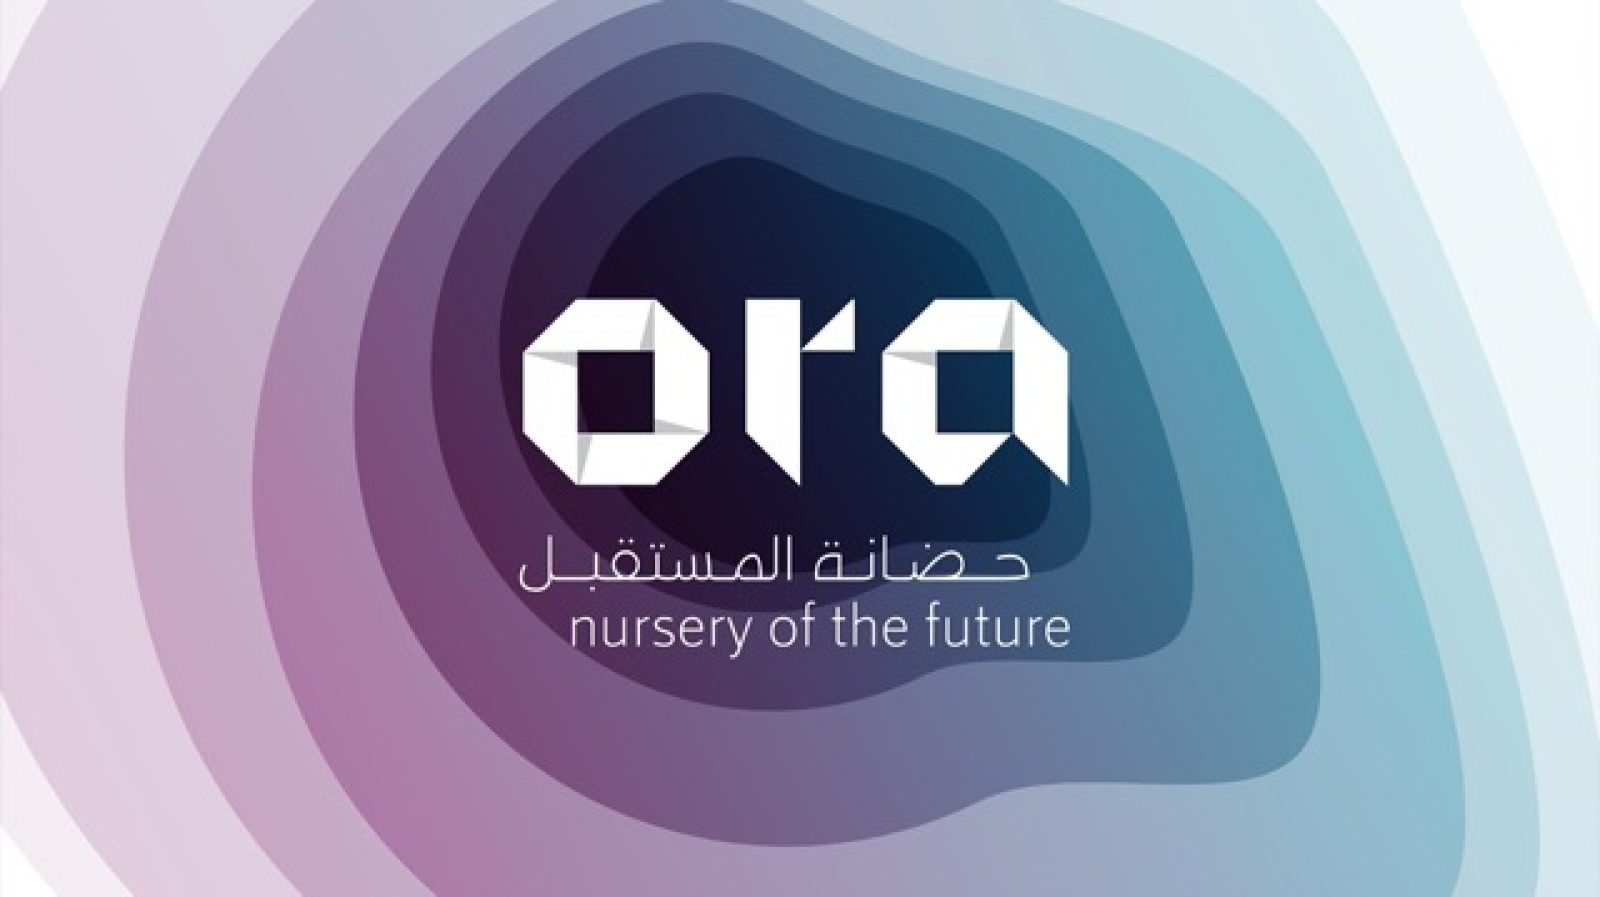 Ora encompasses the future of early-years education design